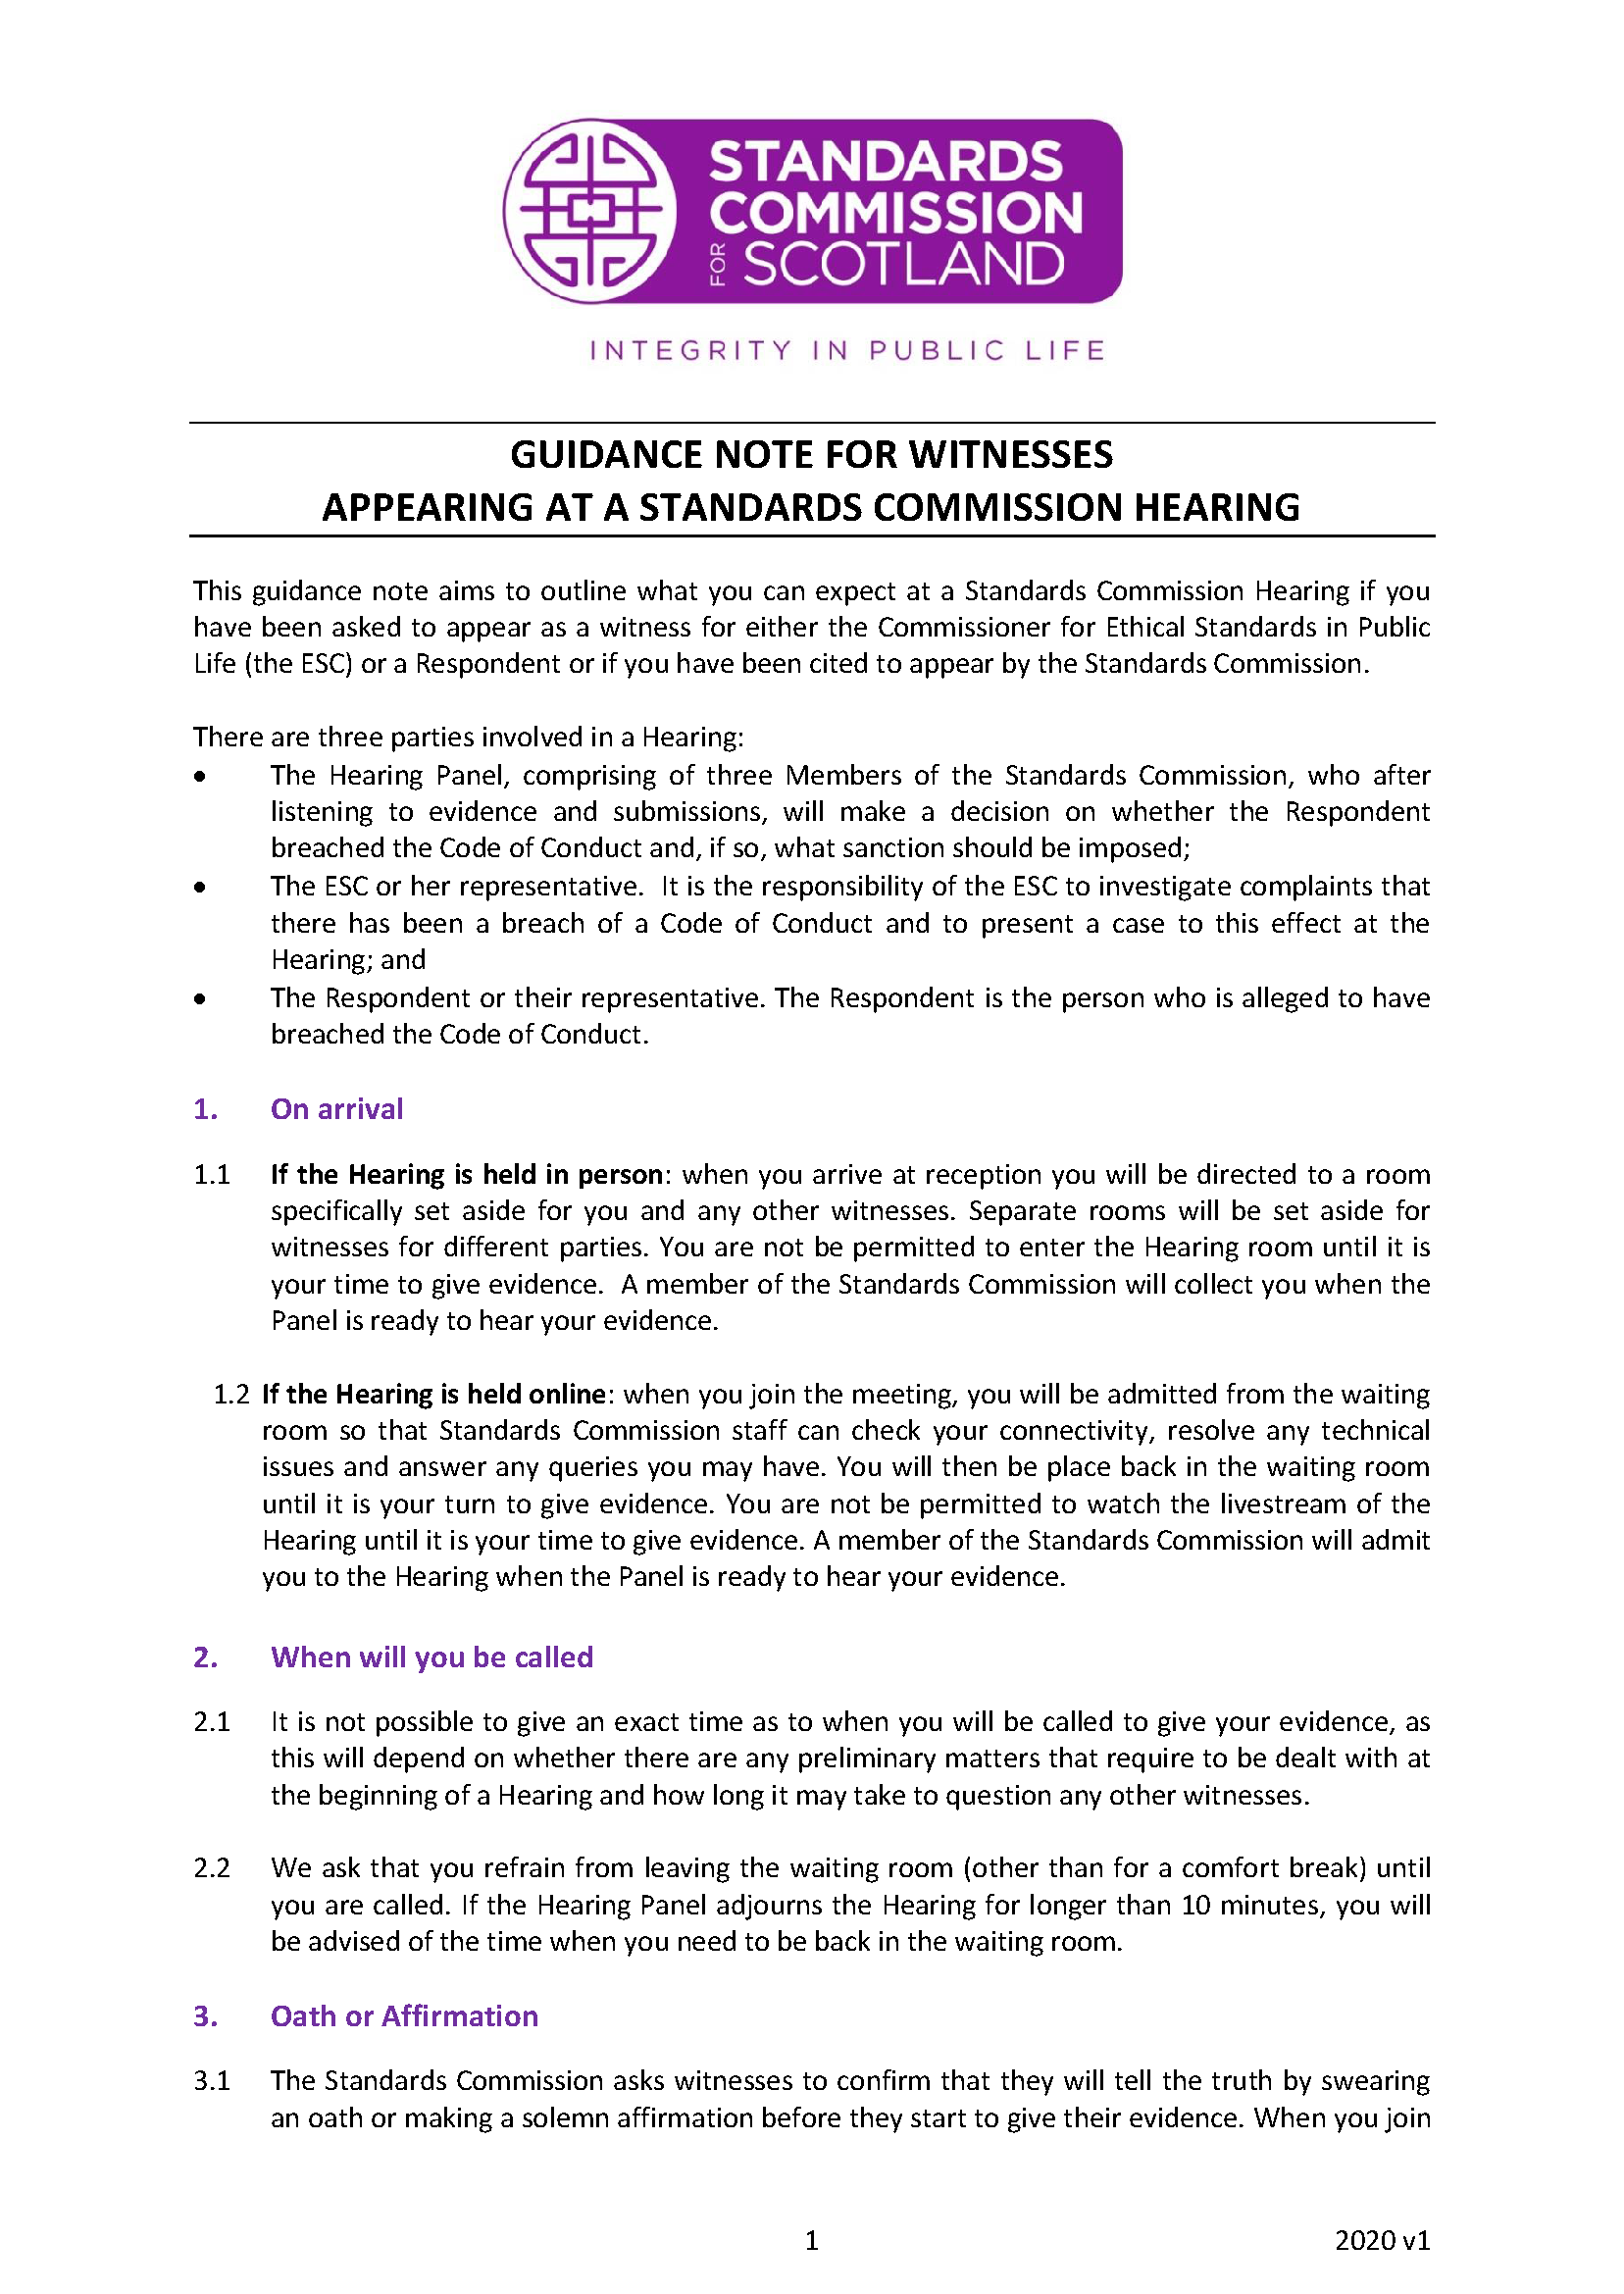 Guidance Note for Witnesses